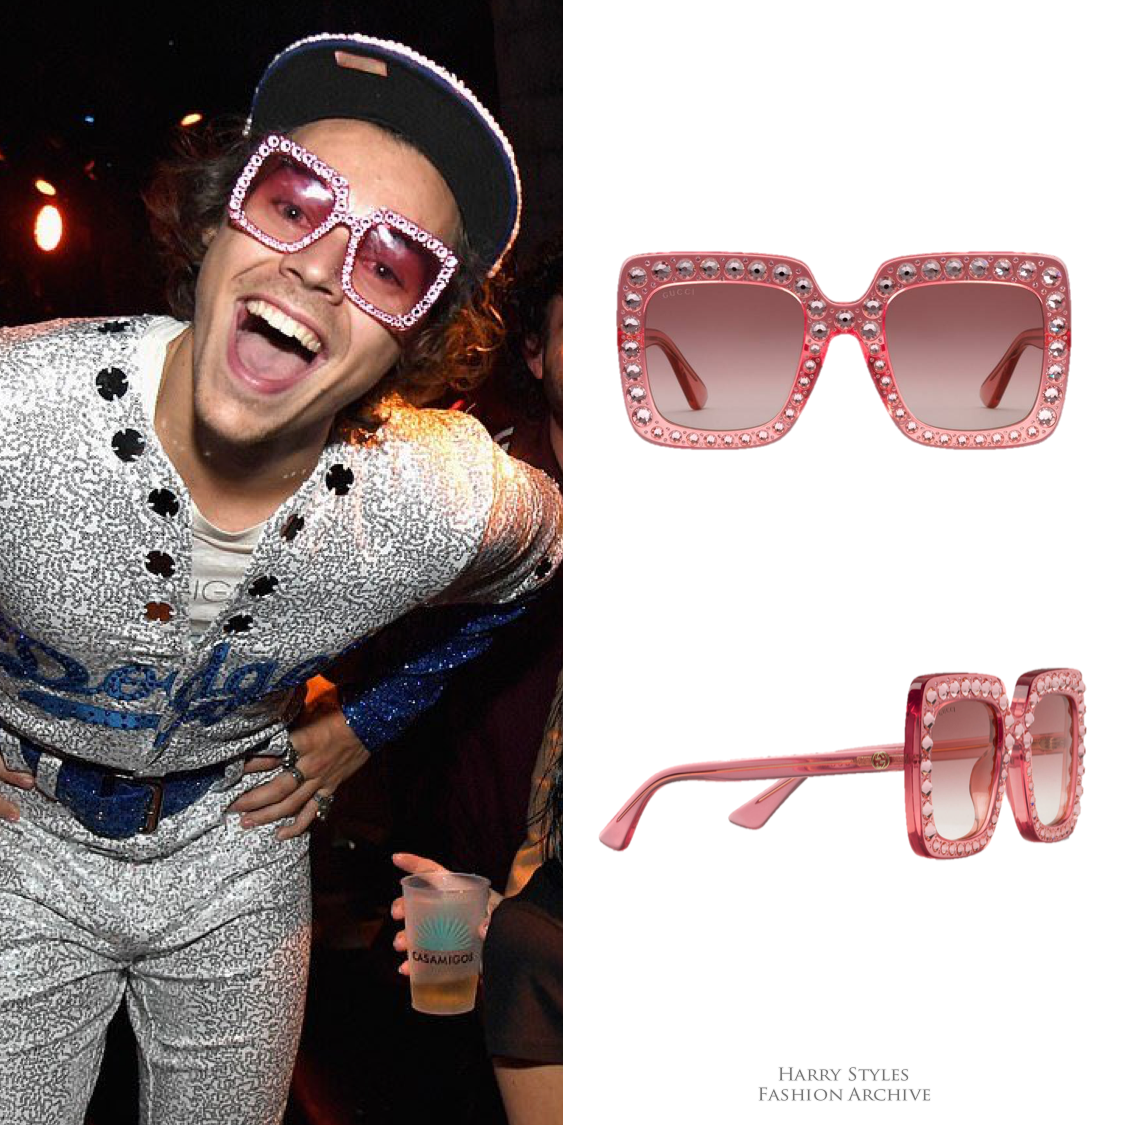 Harry Styles Fashion Archive — Harry at the Casamigos Halloween Party